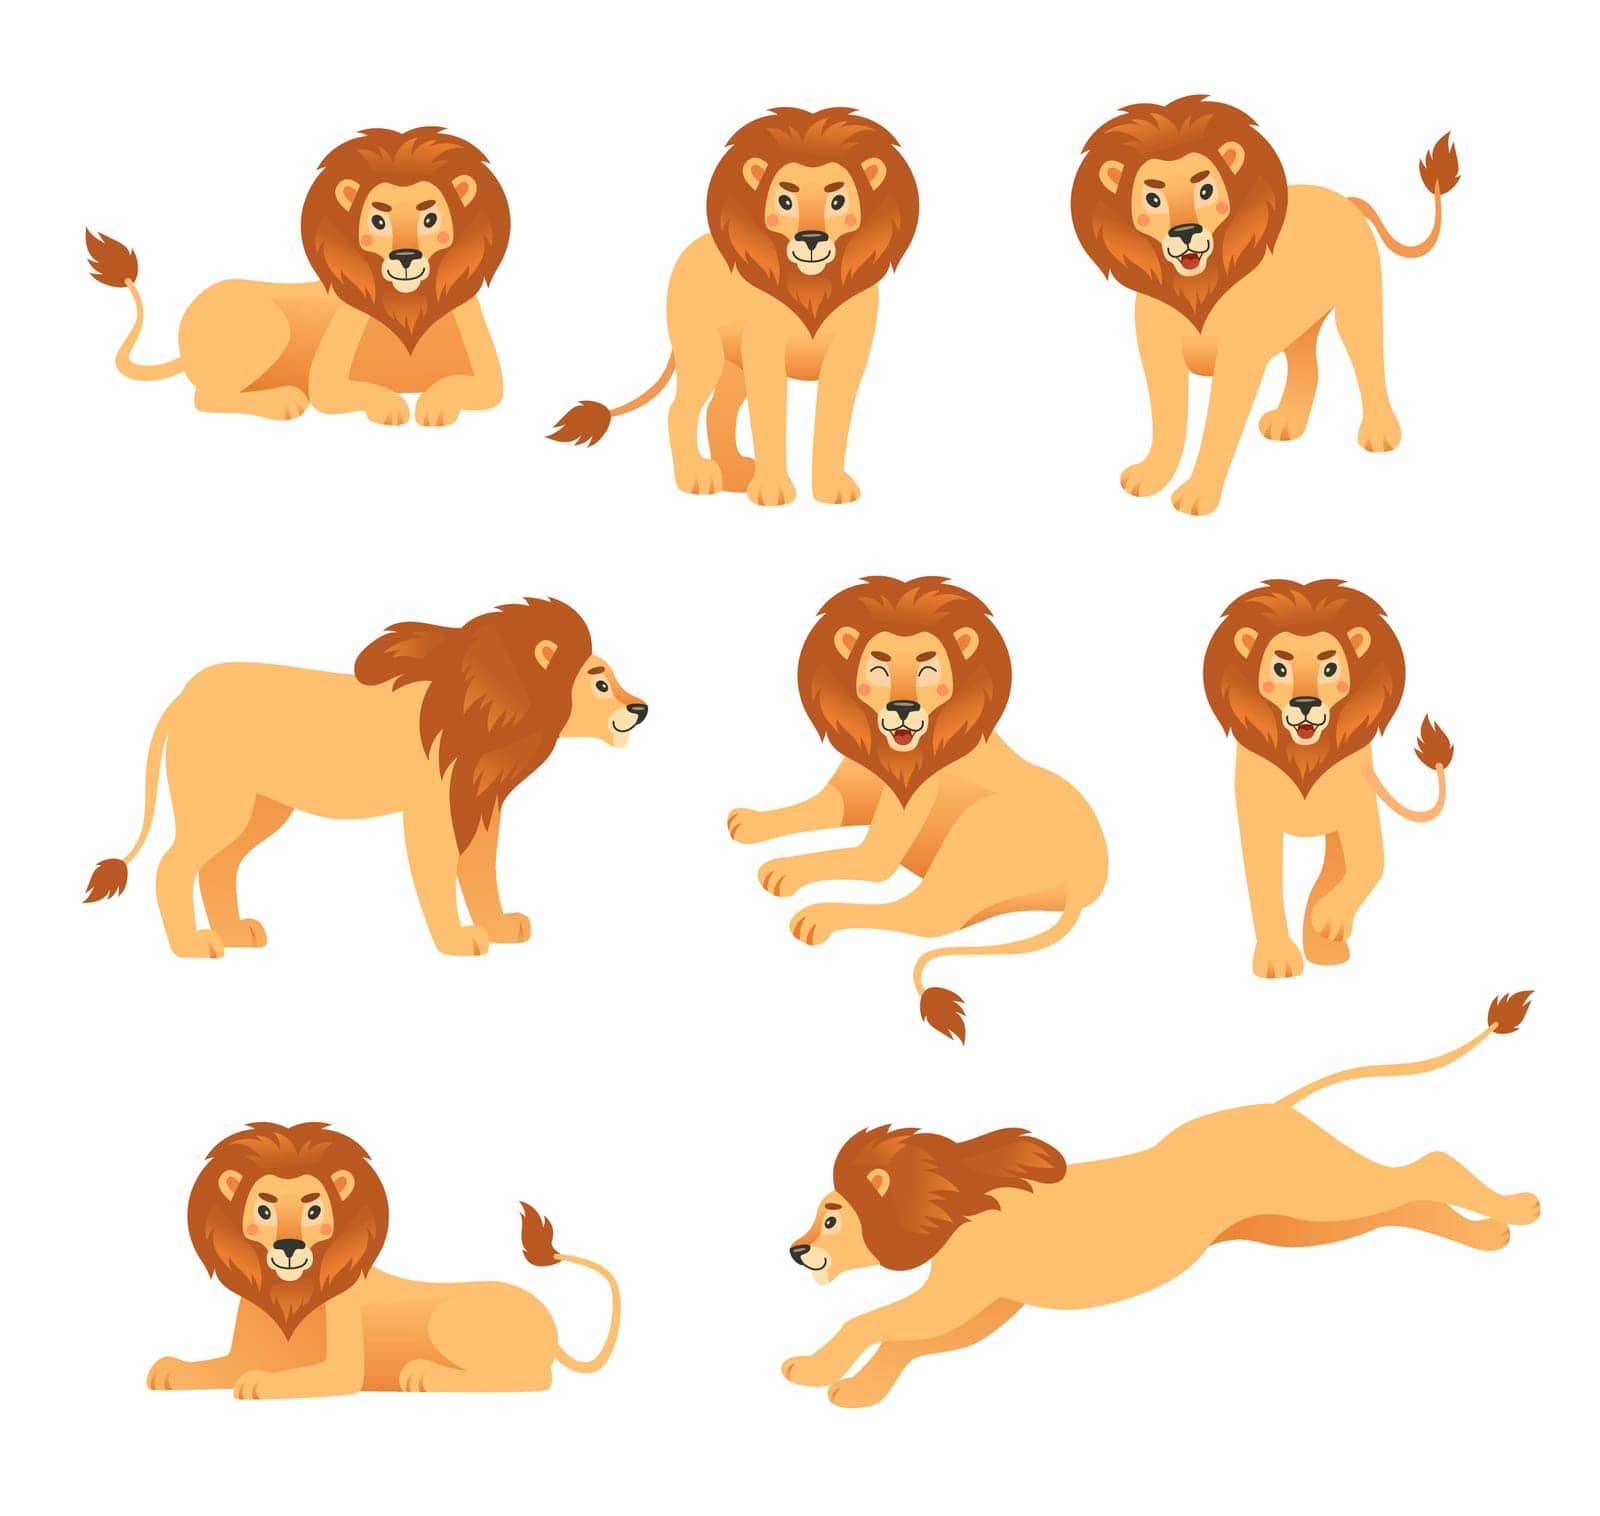 Cute cartoon lion in different poses vector illustration set. Happy orange-colored feline animal walking, lying, jumping, sitting and roaring. Wild animal, king concept